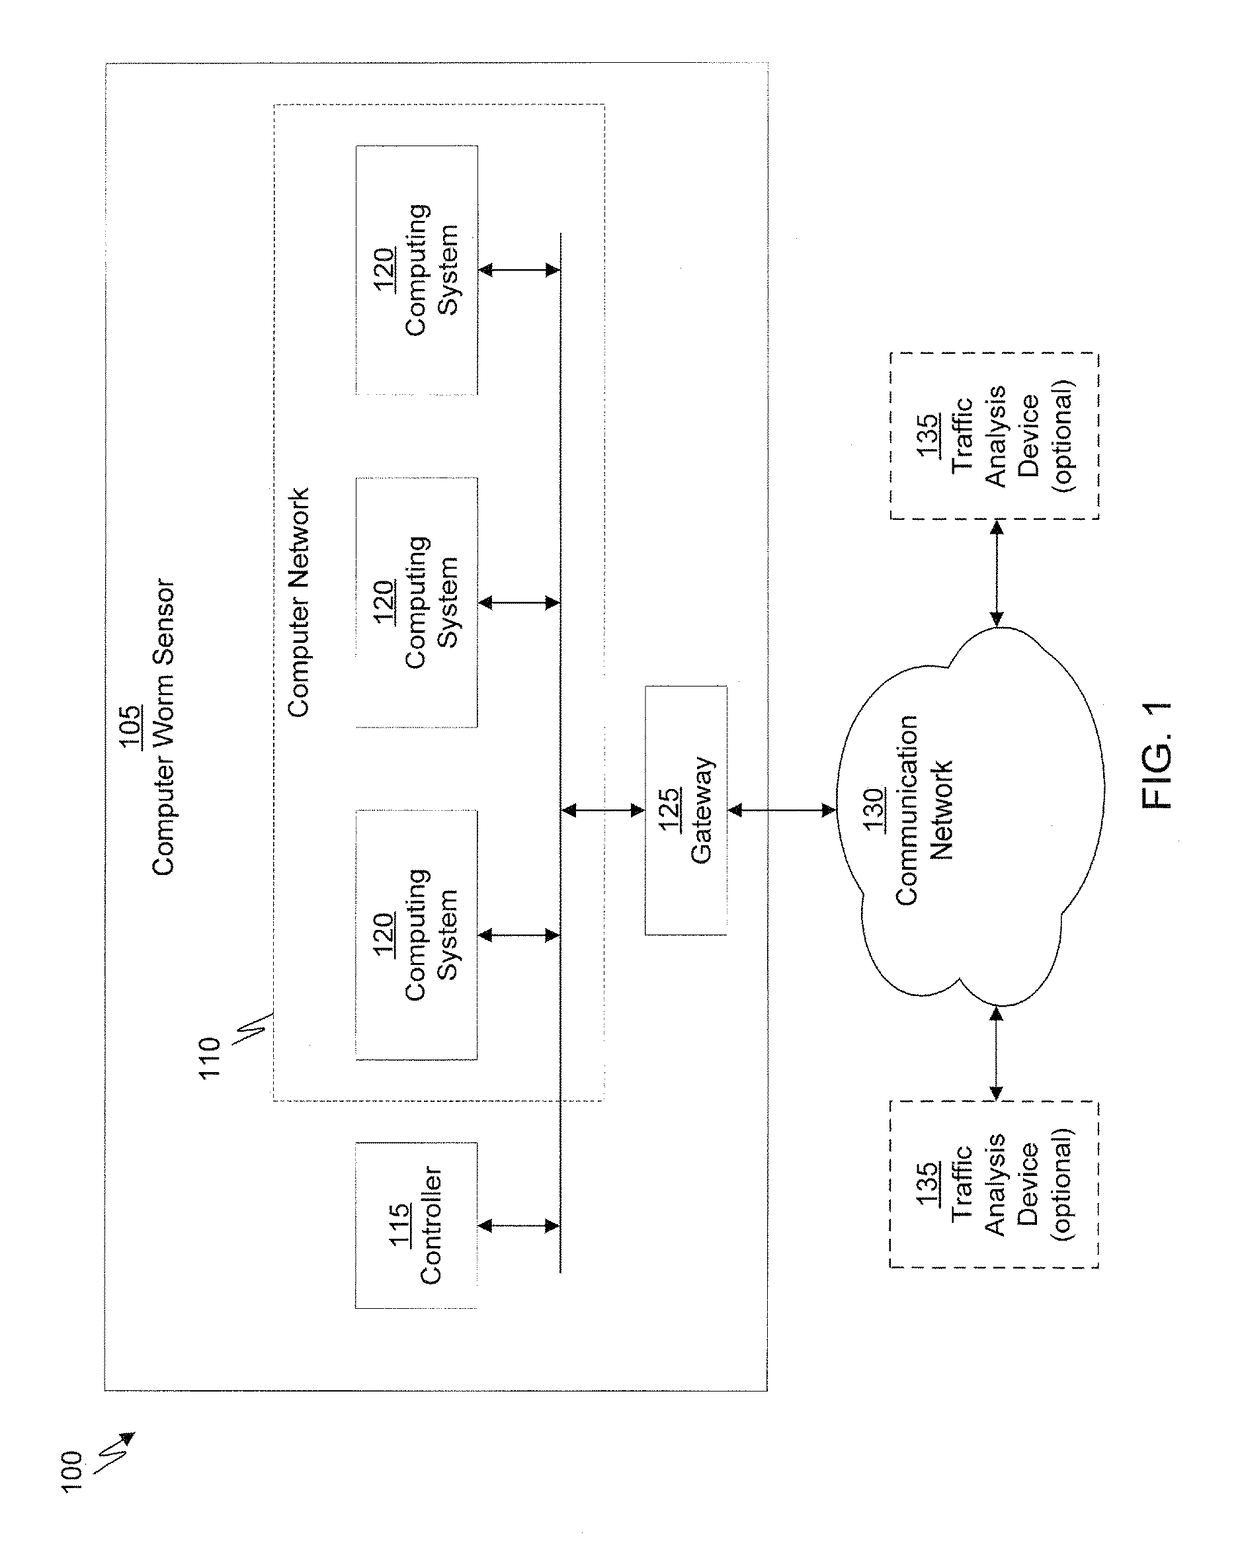 System and method of detecting malicious content